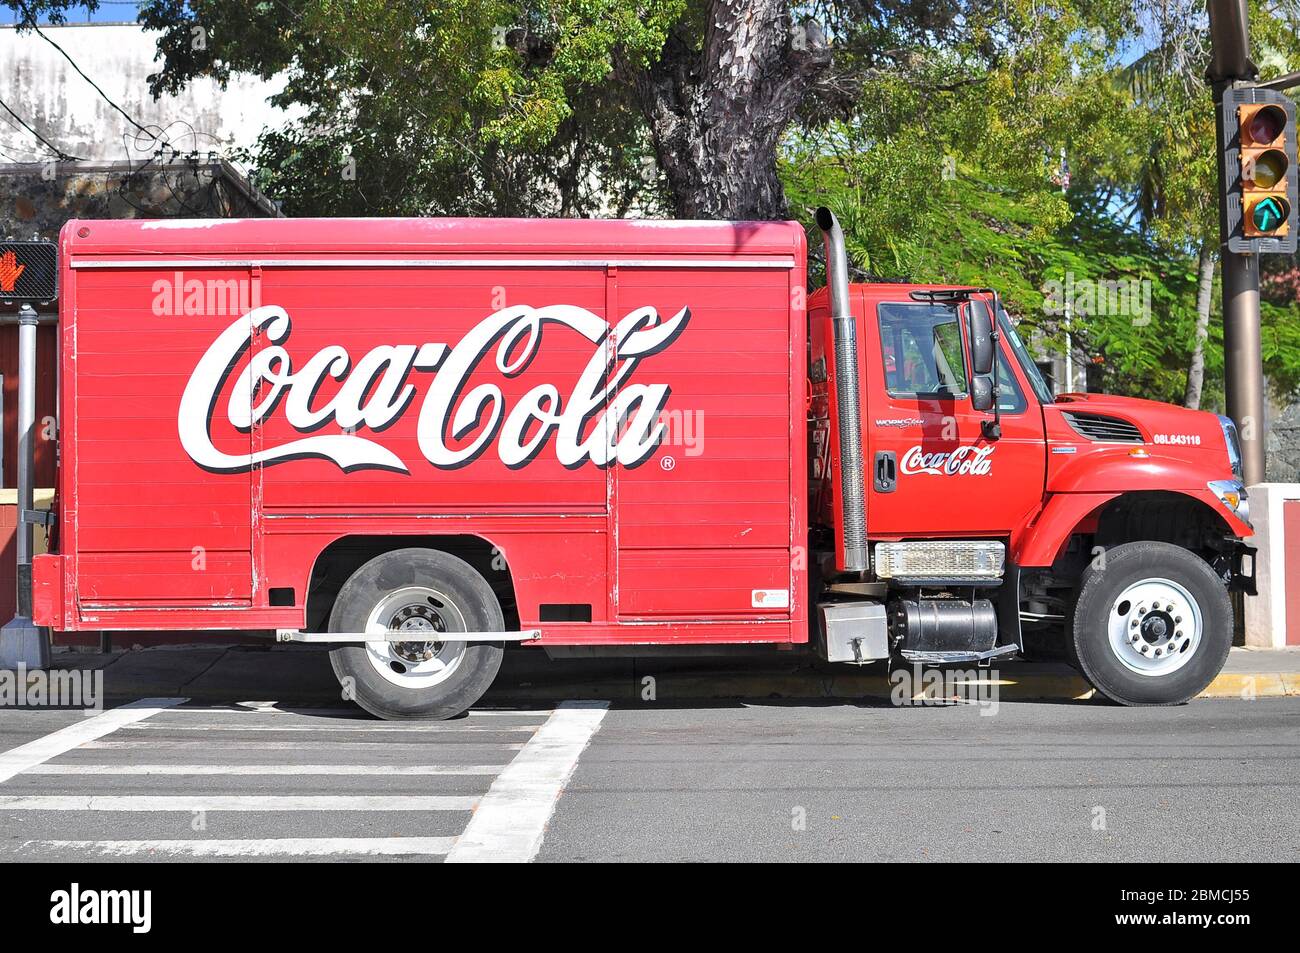 Image of a Coca cola truck parked in the street. Side view. Stock Photo